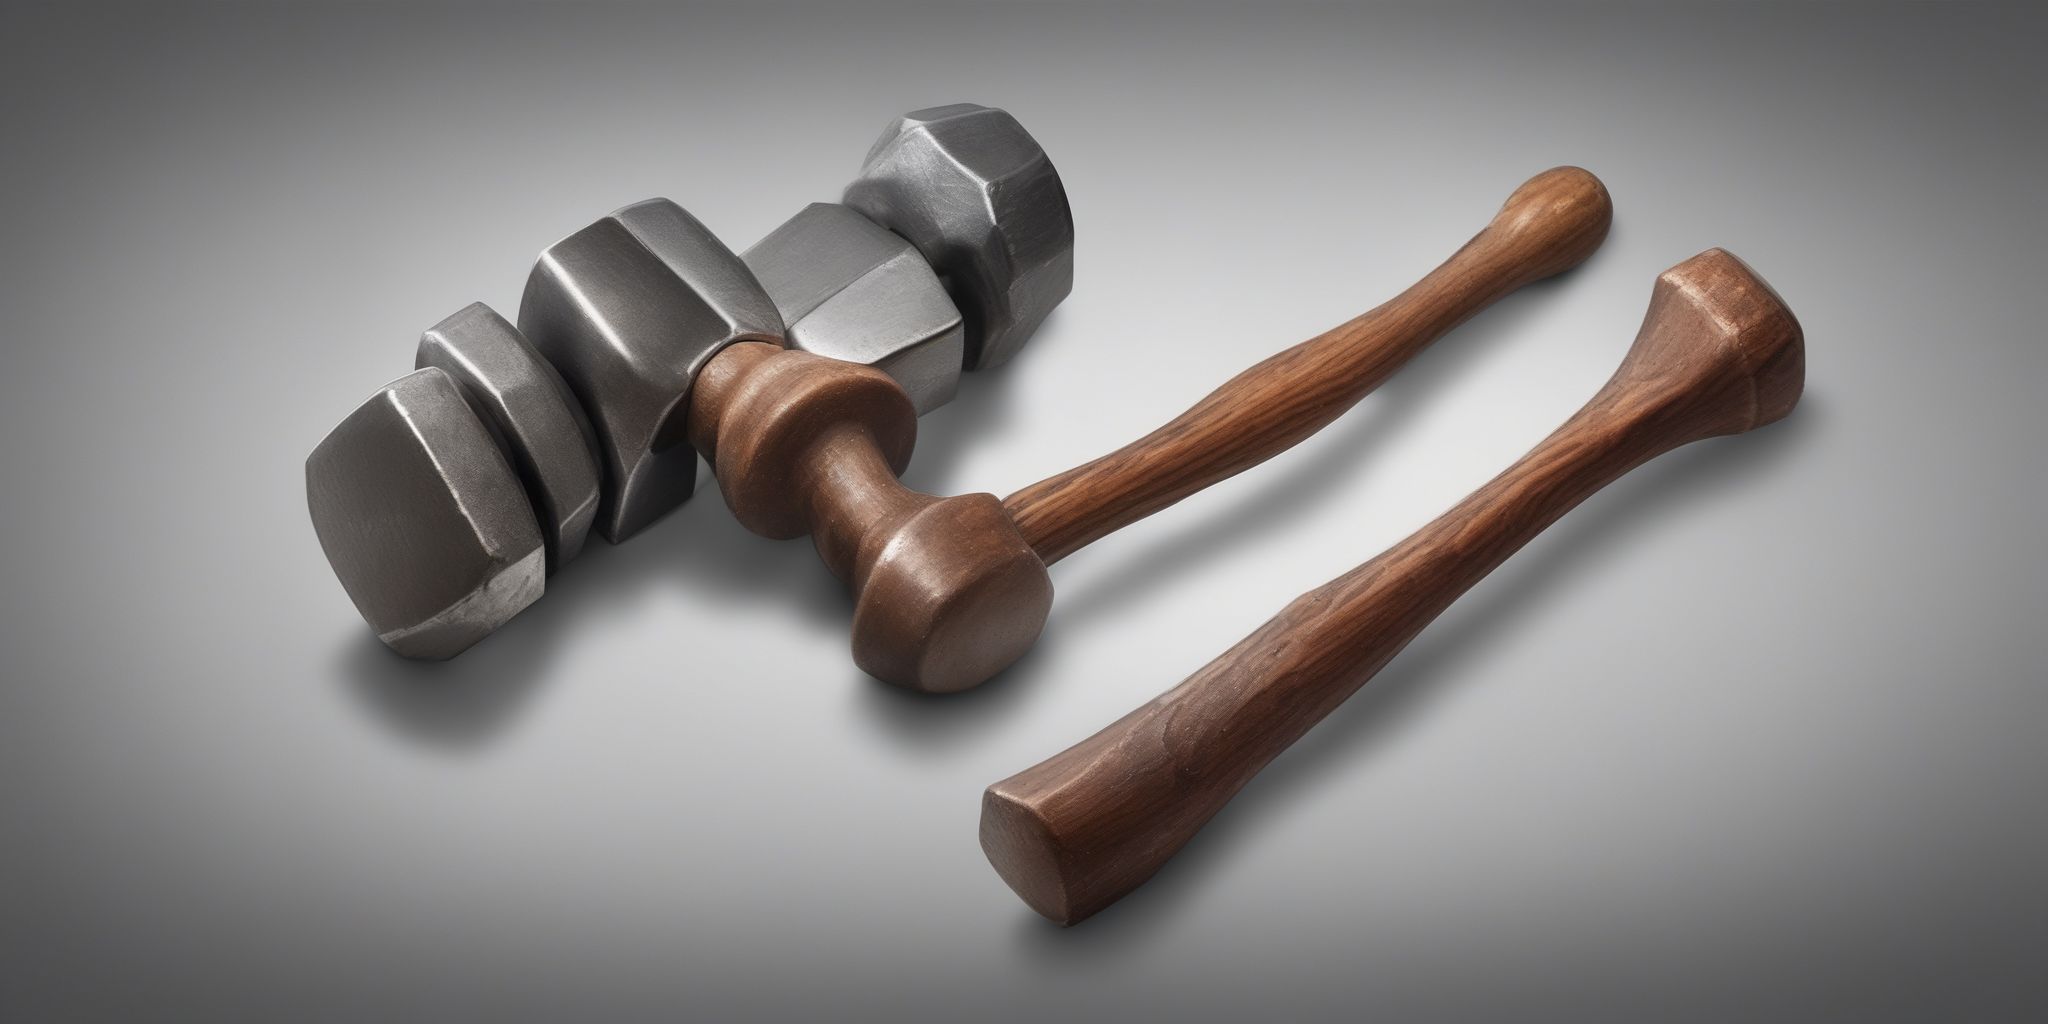 Hammer  in realistic, photographic style